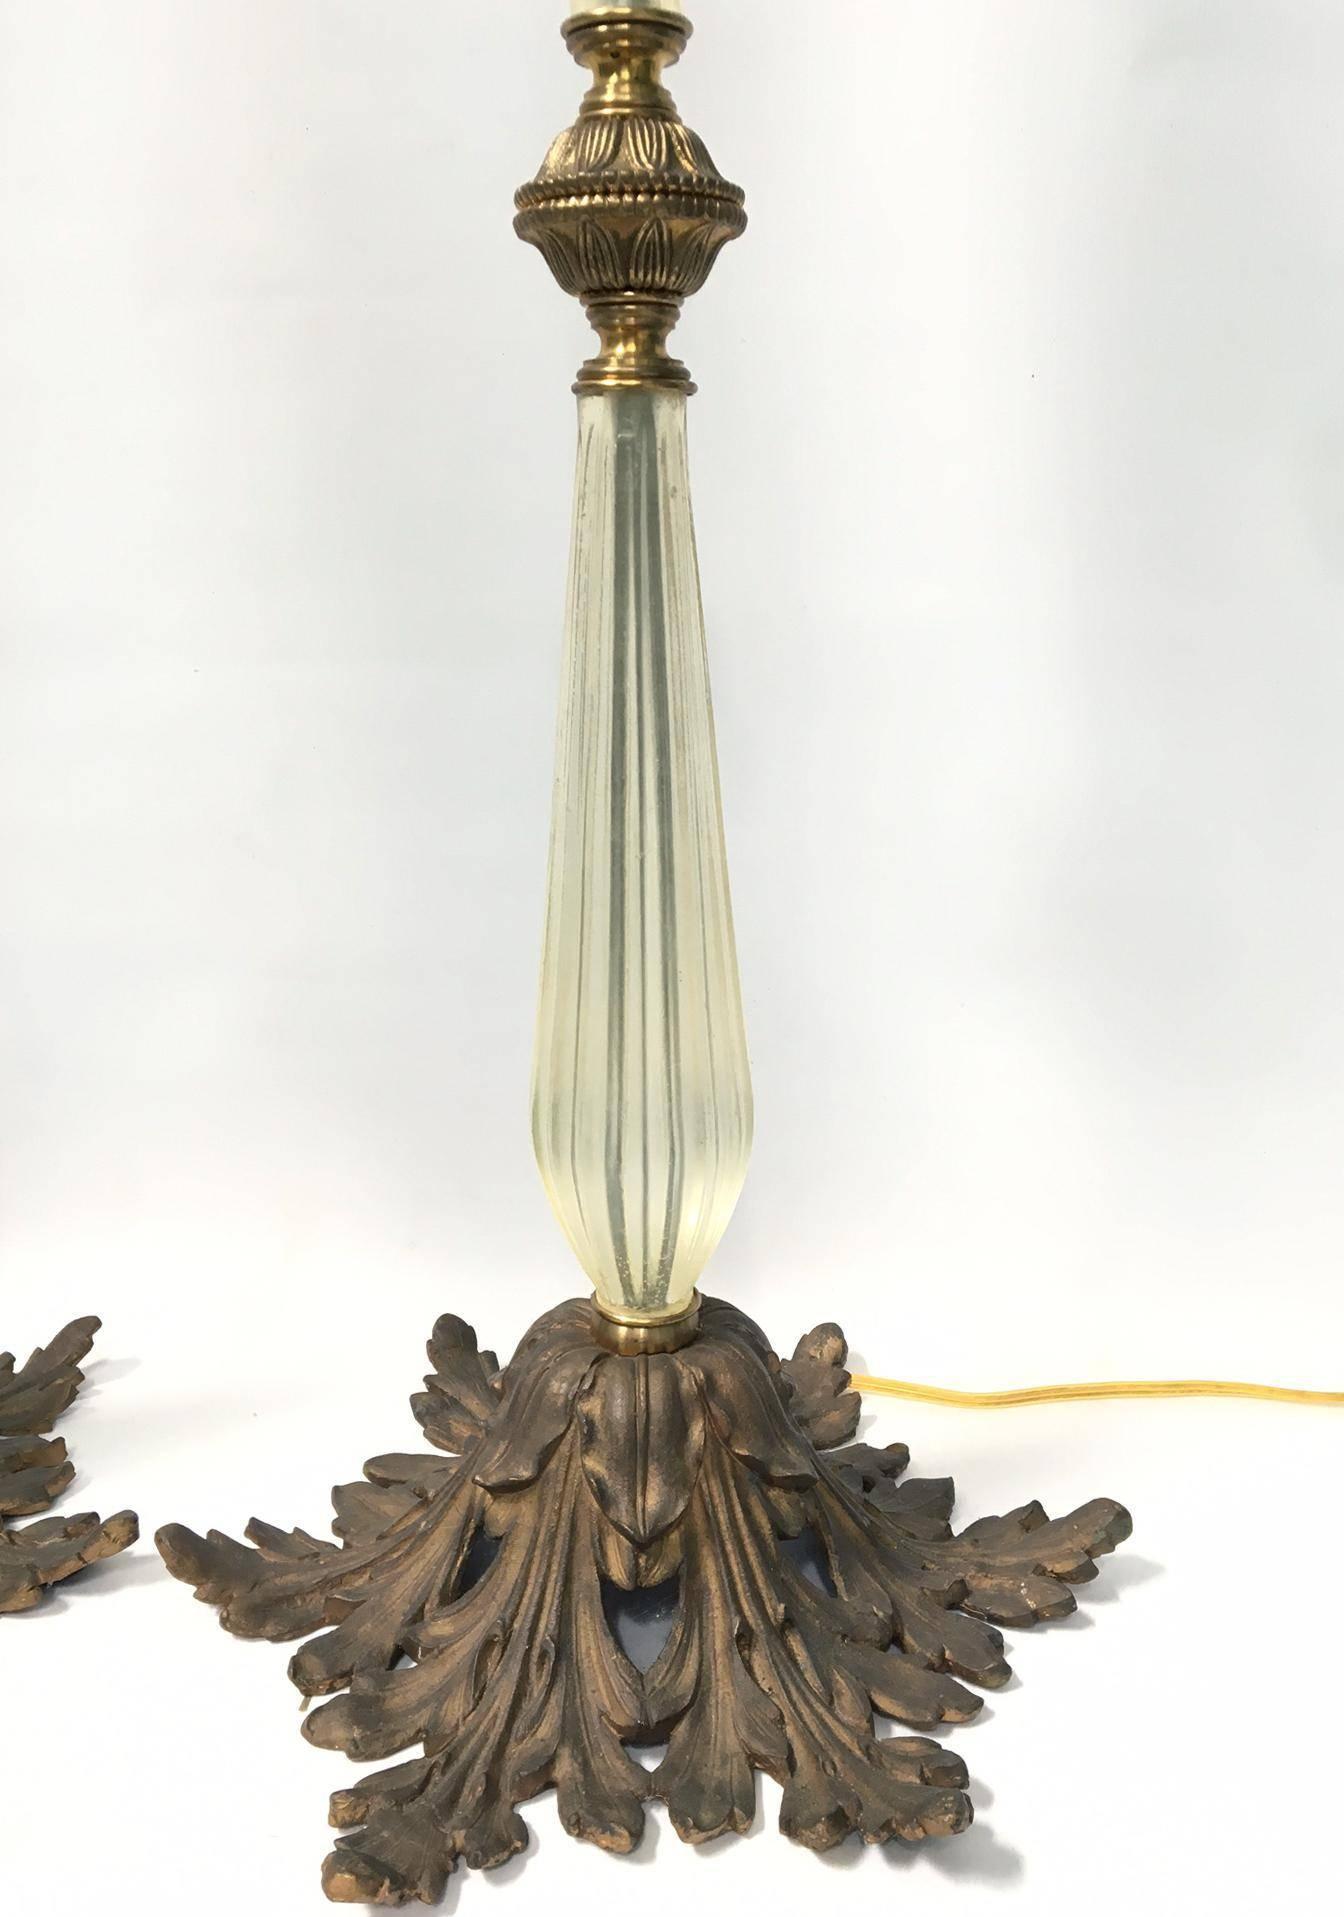 Large Murano Italian table lamps feature sculptural glass and brass colored accents on an ormolu base molded in the acanthus leaf characteristic of the renaissance style. Each lamp stands over 45